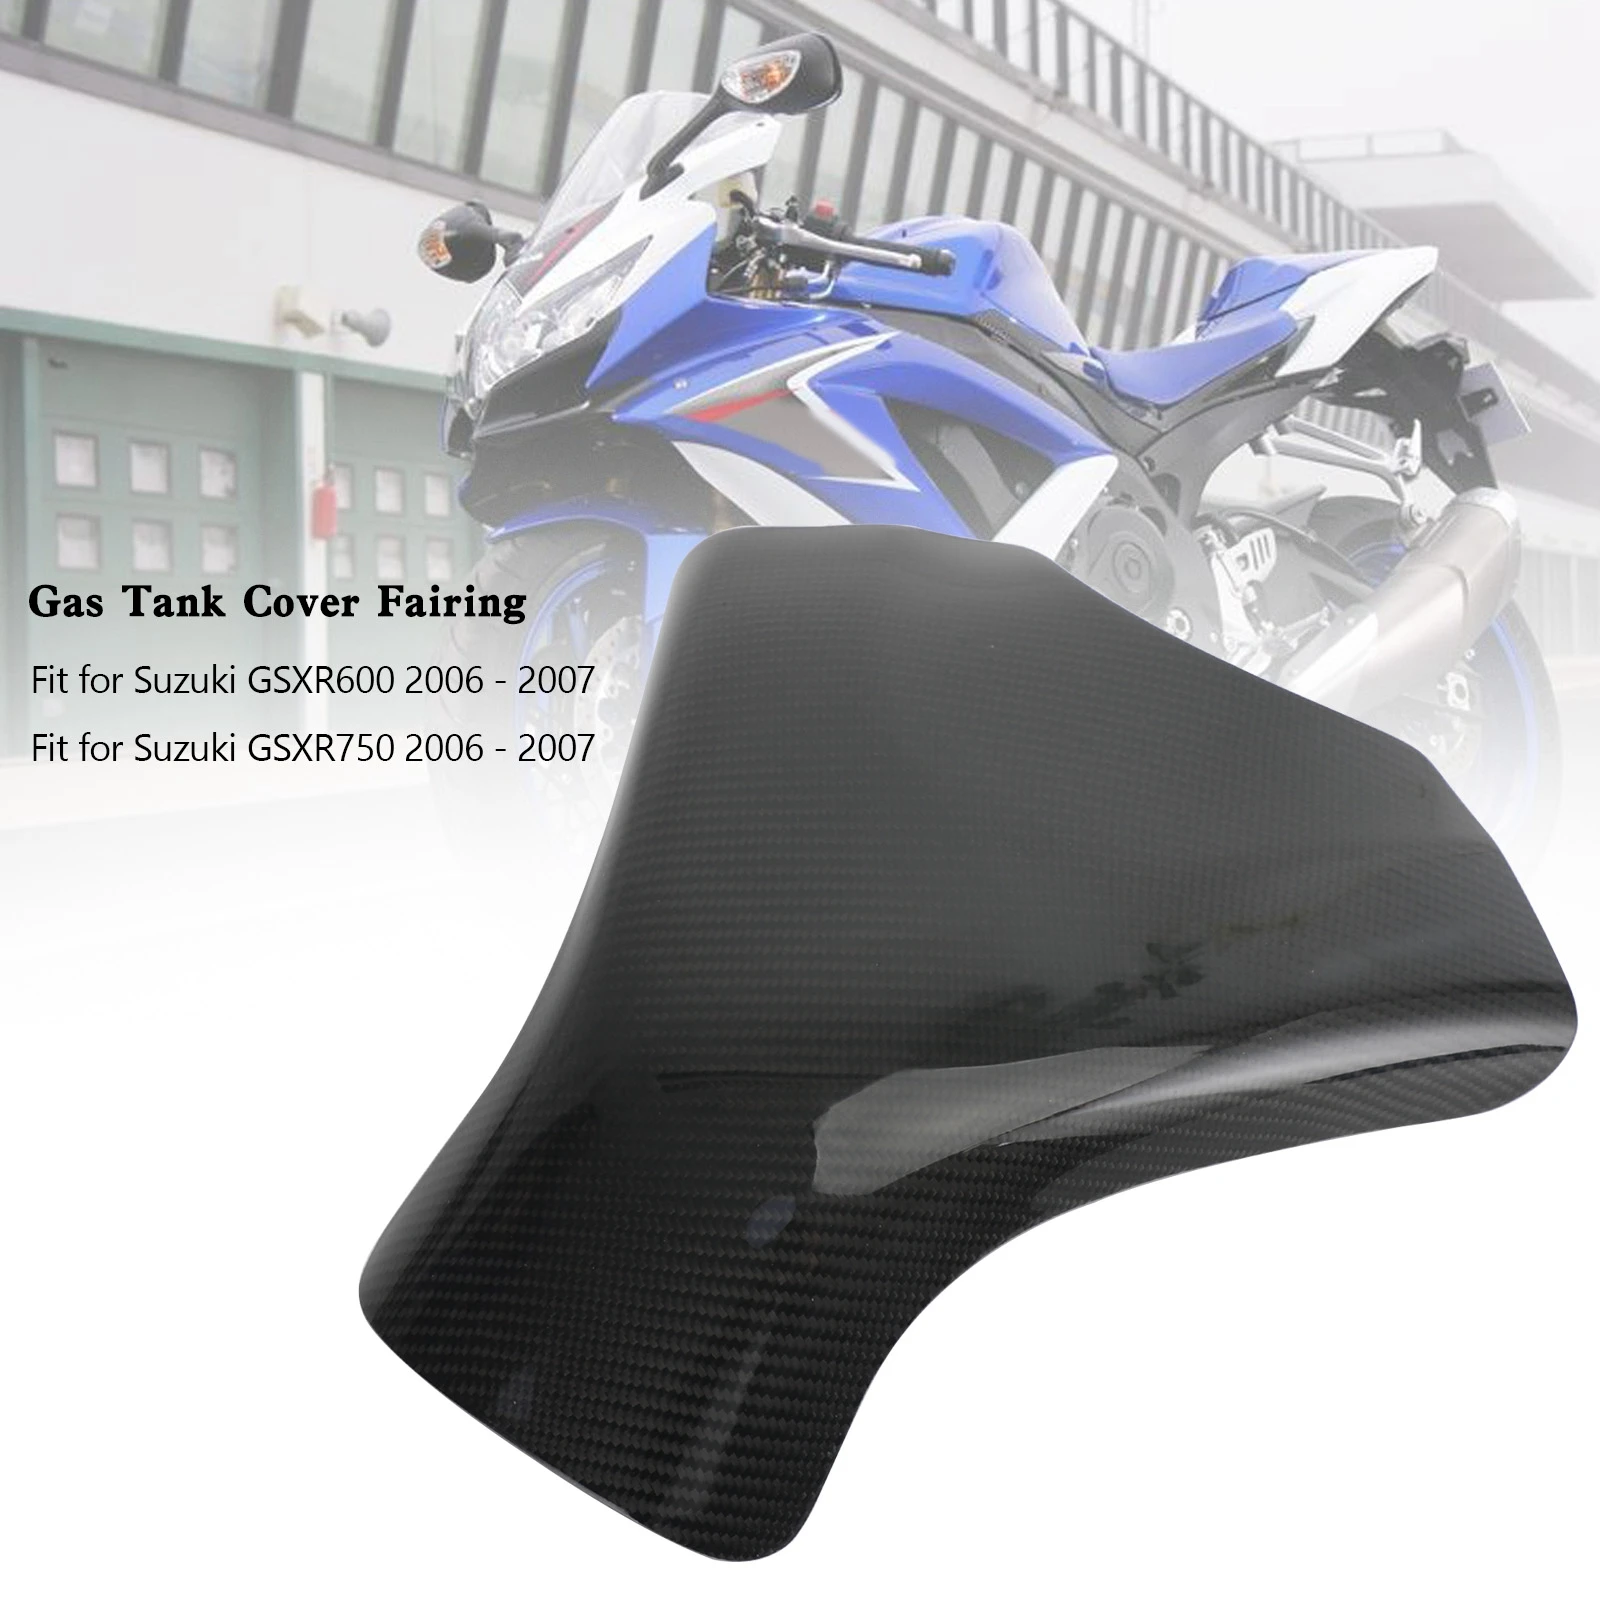 

Areyourshop Gas Tank Cover Fairing Protector for Suzuki GSXR600 GSXR 750 2006-2007 Carbon Motorcycle Accessories